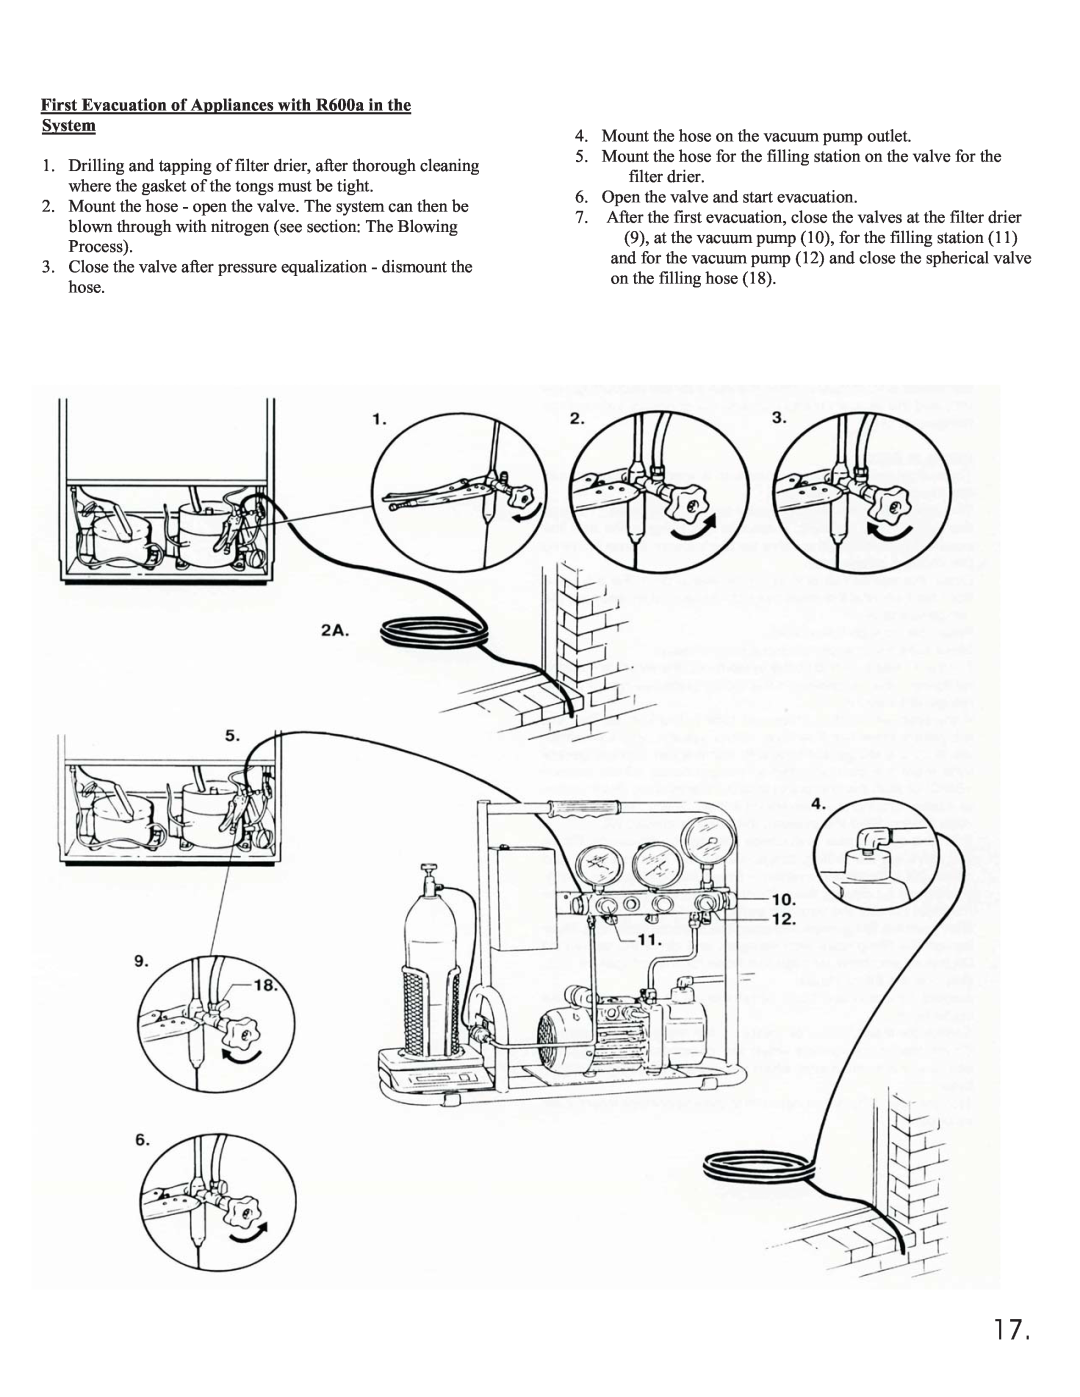 Equator 375 service manual Mount the hose on the vacuum pump outlet 